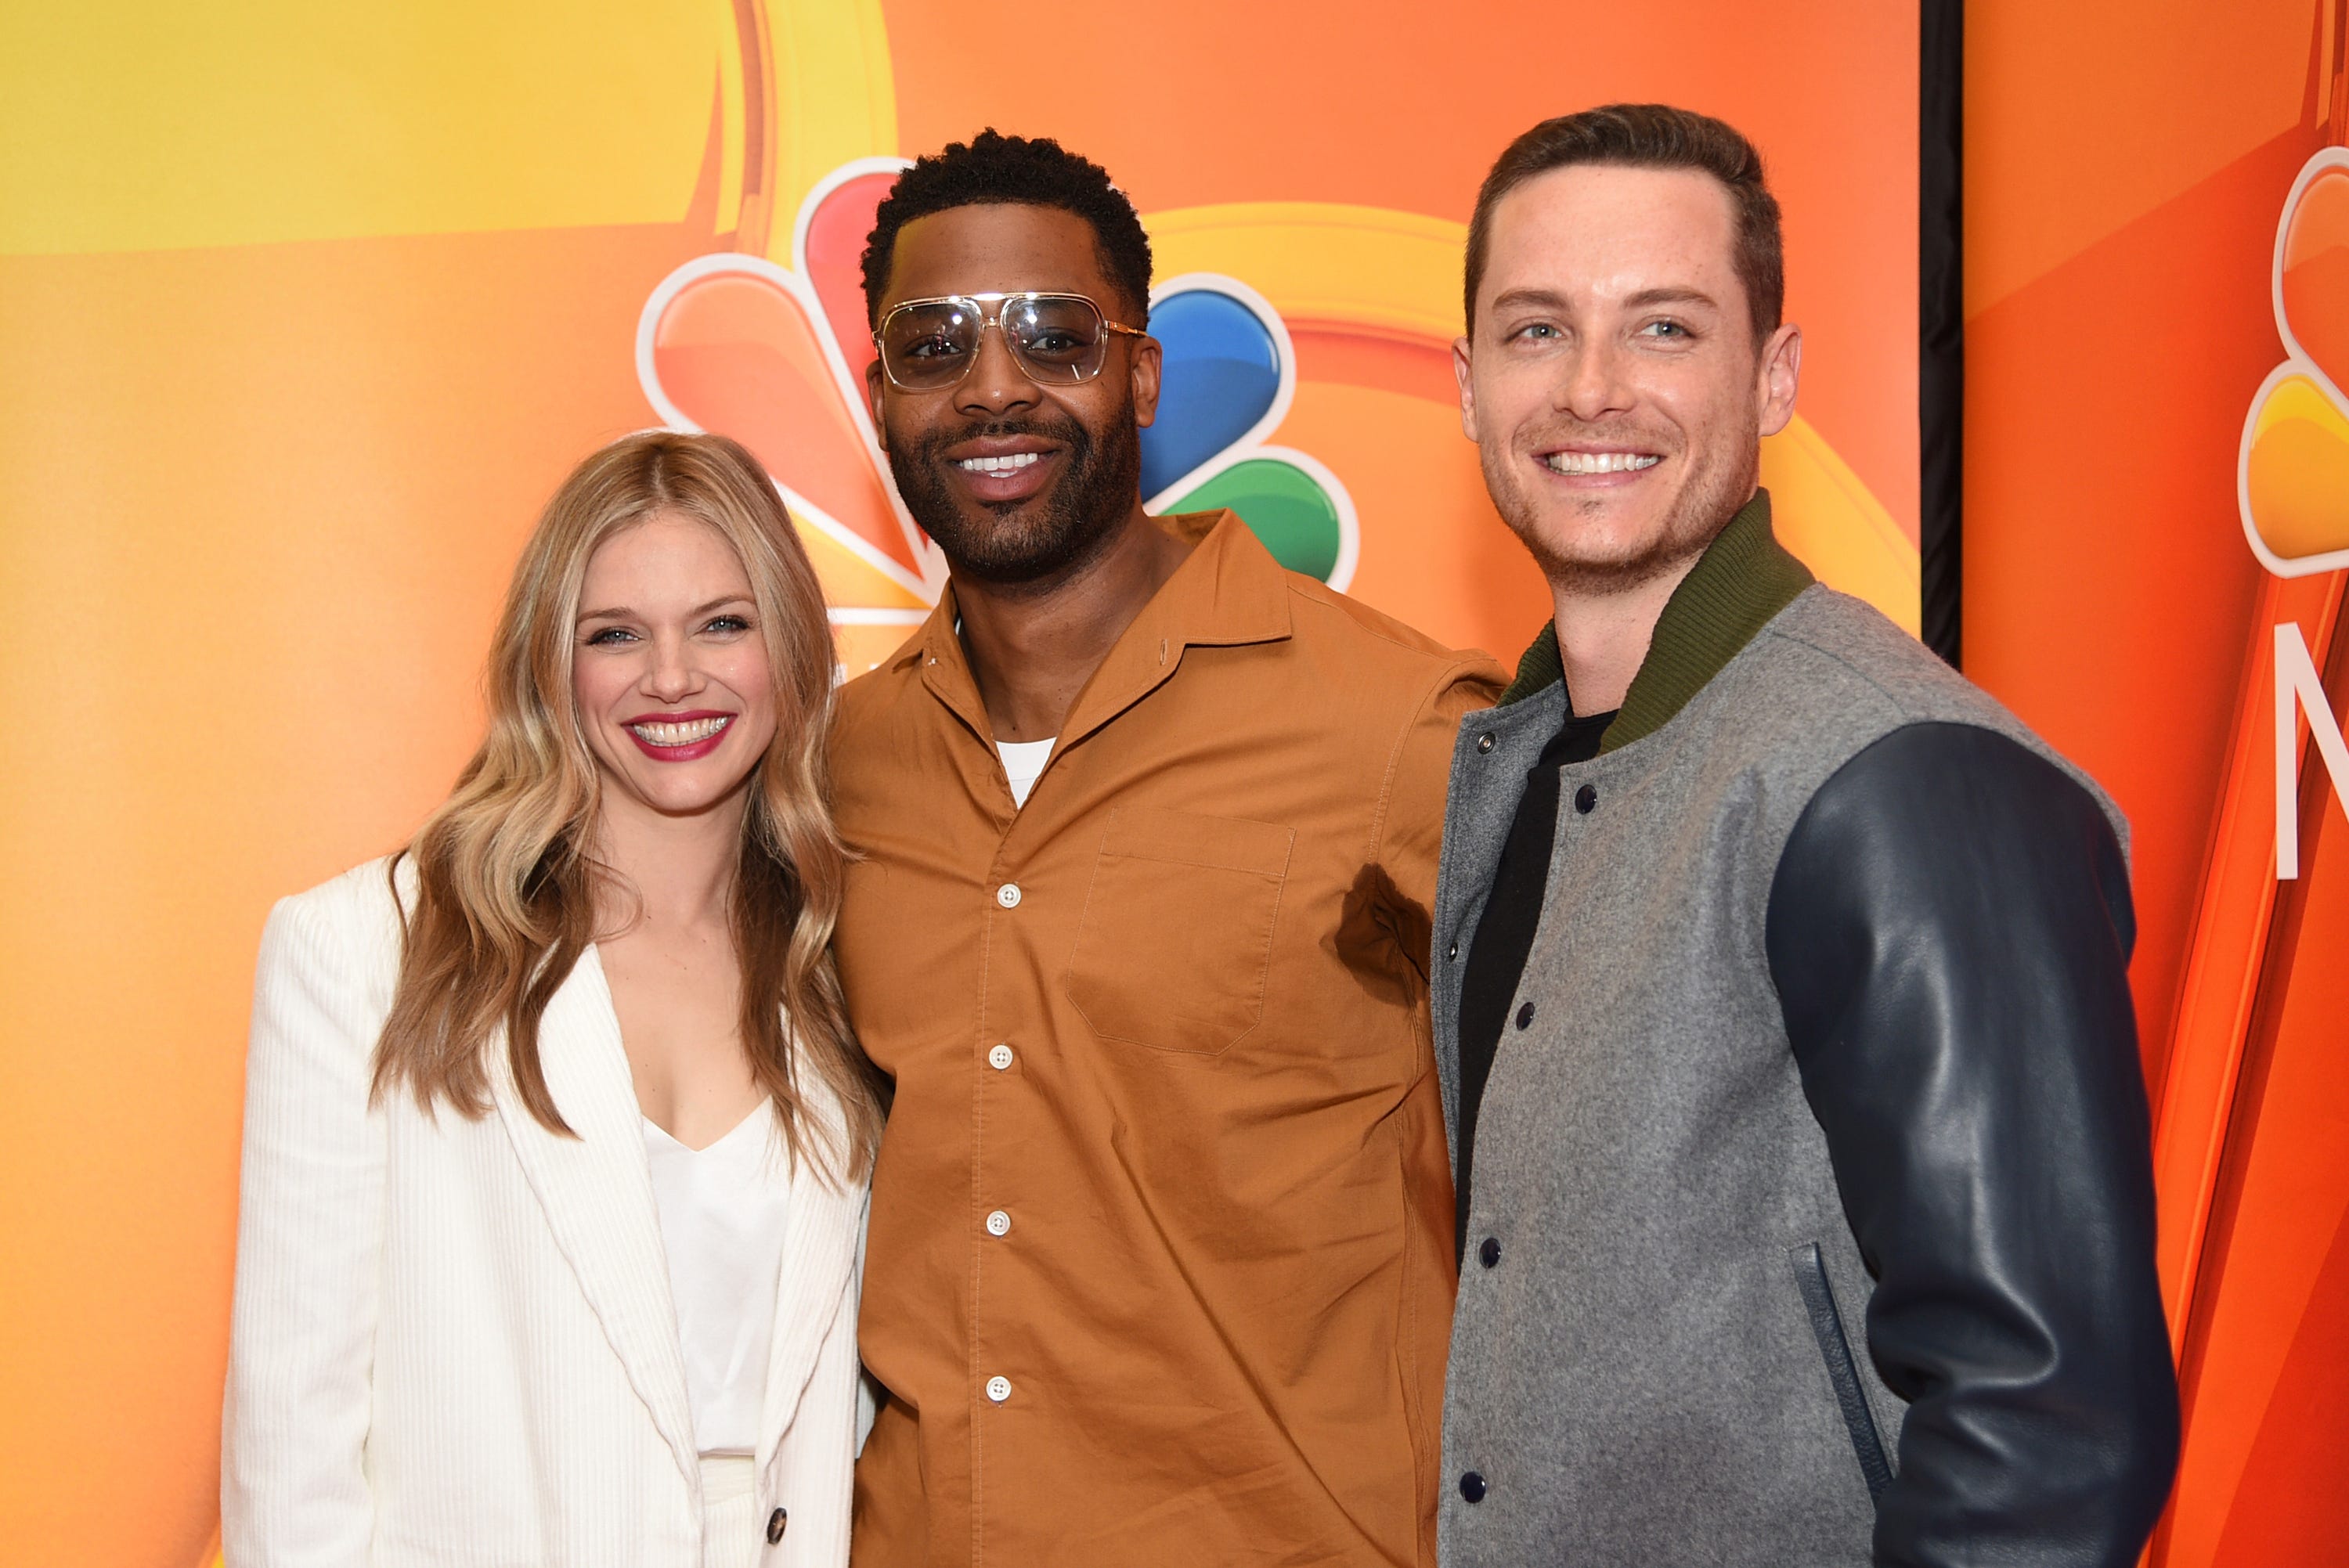 'Chicago .' star Jesse Lee Soffer reveals why he left NBC series